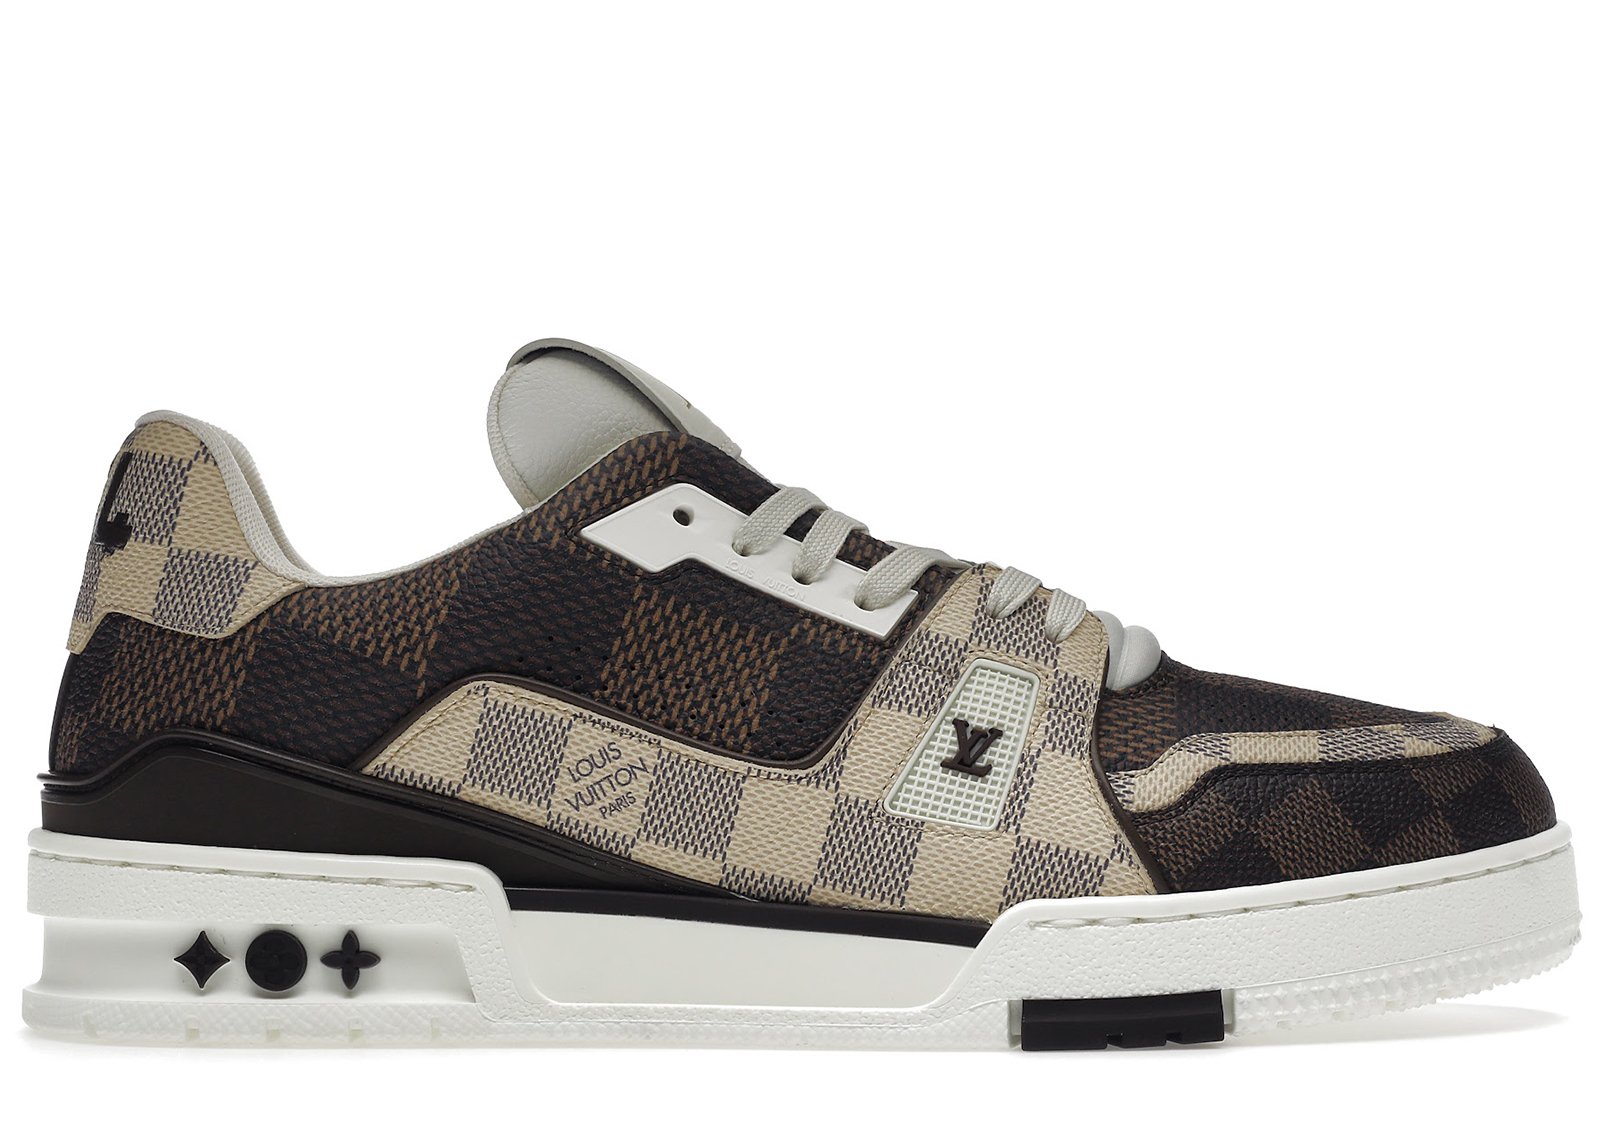 Louis Vuitton LV Trainer Sneaker available in four new colors - dlmag